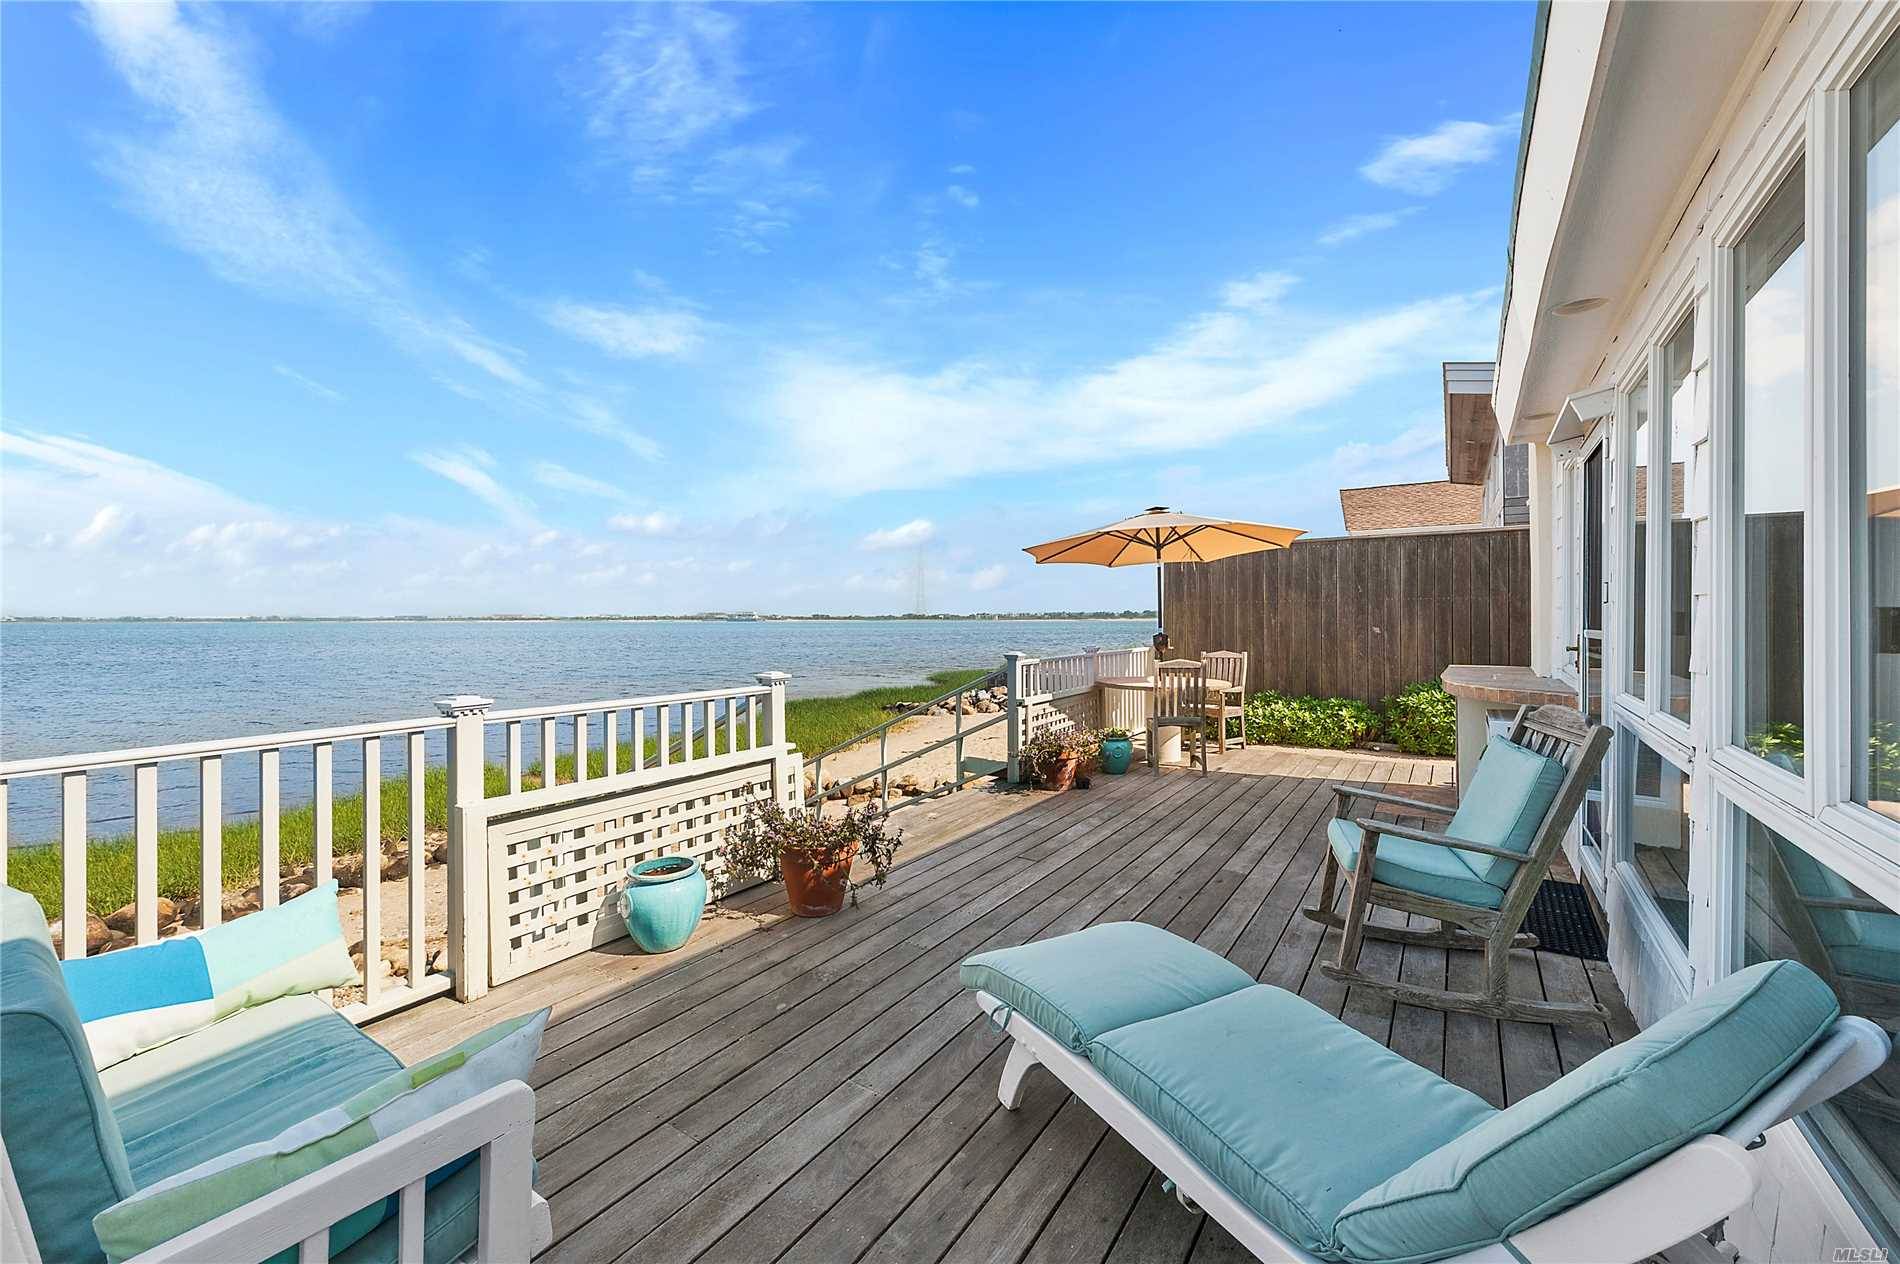 Enjoy Stunning Bayfront Water Views From This Beautifully Styled, 2 Bedroom, 1 Bath Waterfront Cottage In Lazy Point Amagansett.